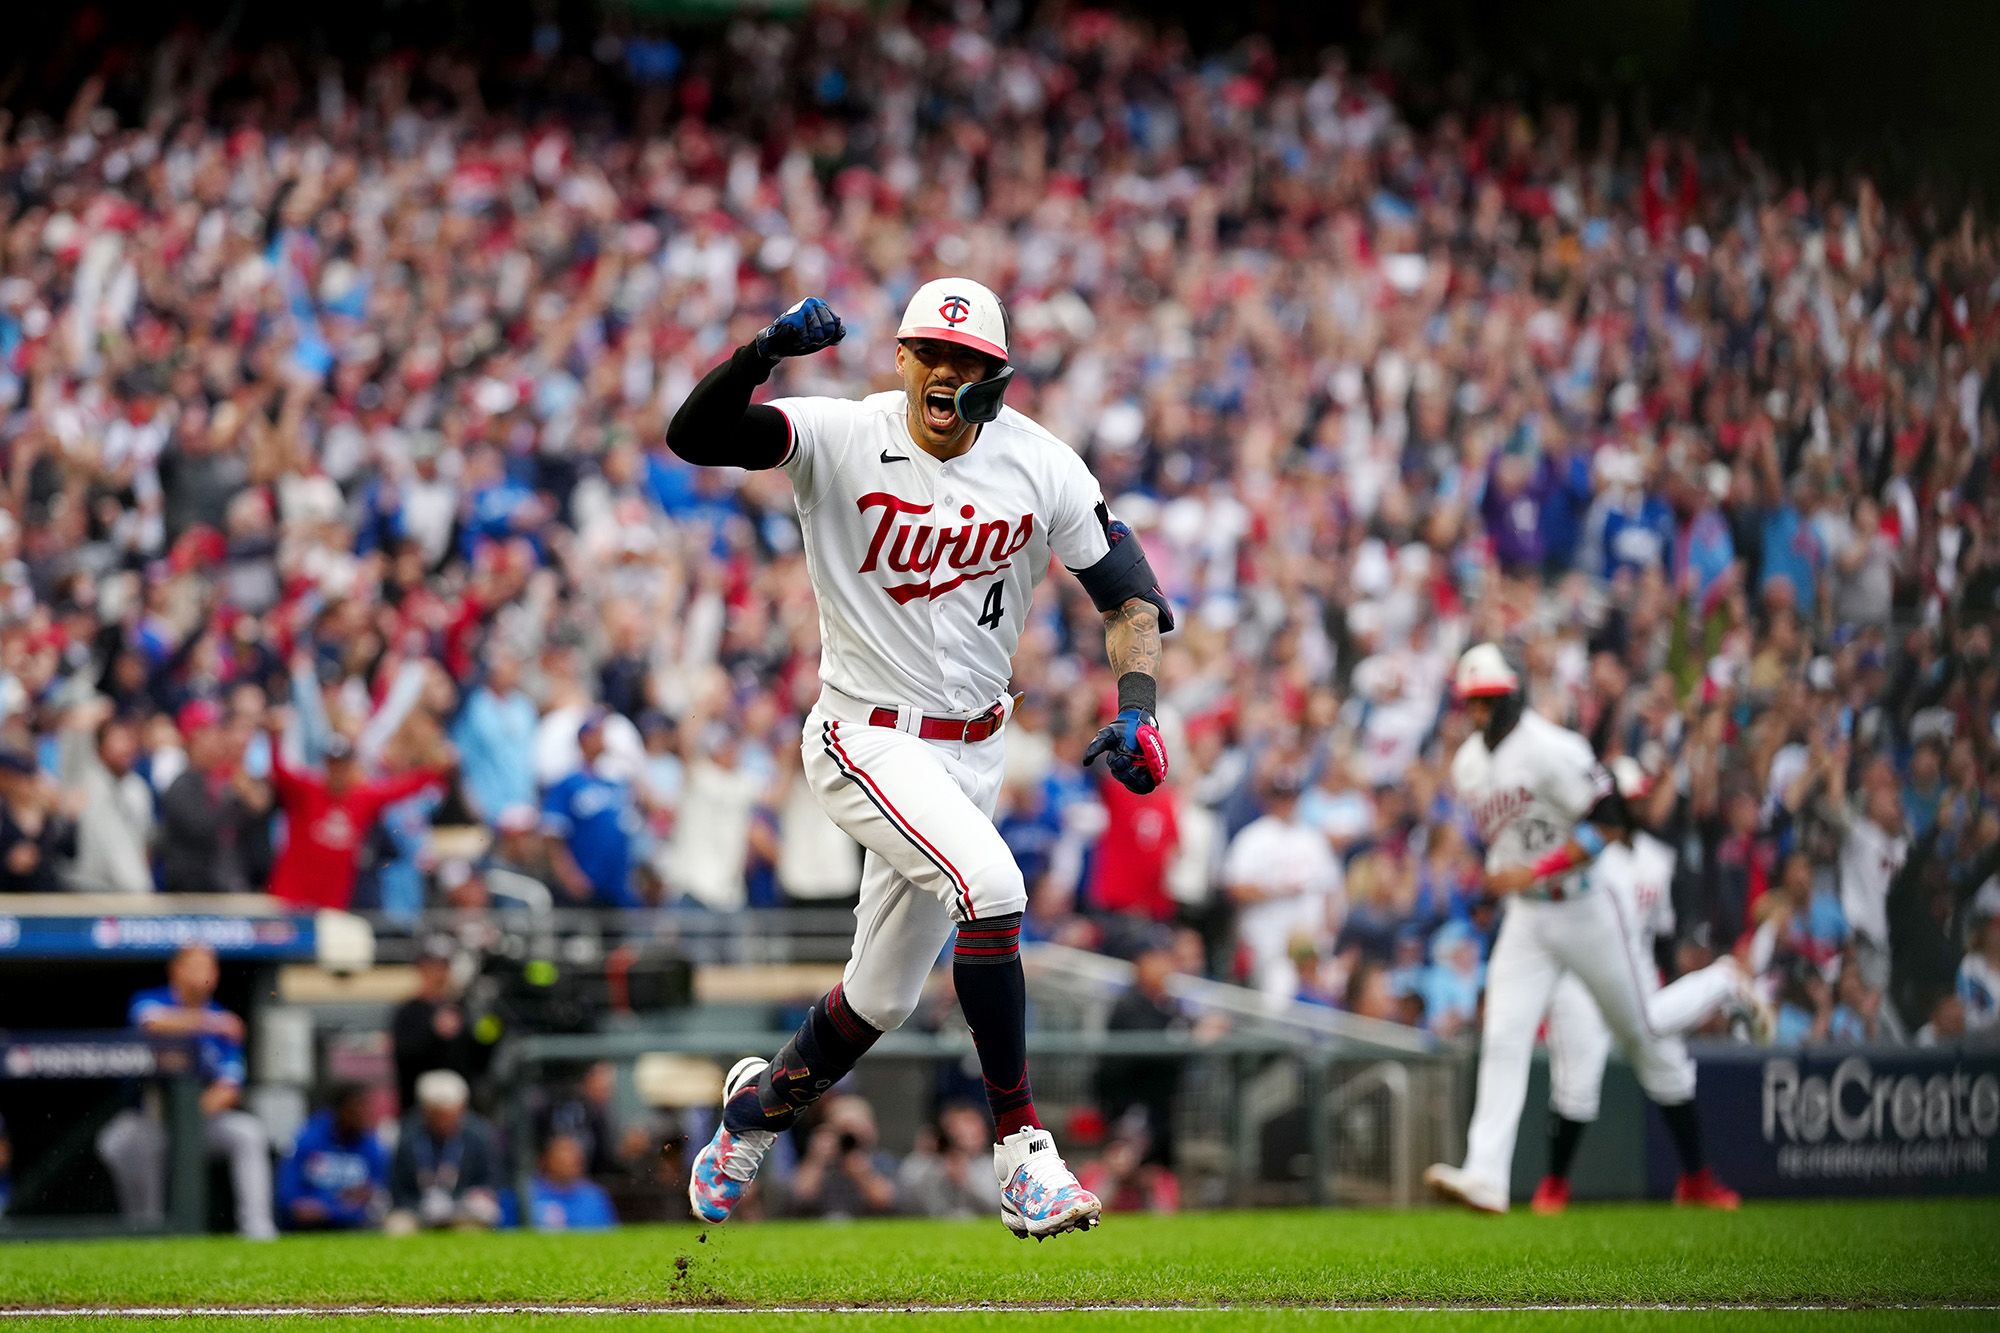 Minnesota Twins claim their first playoff series victory in 21